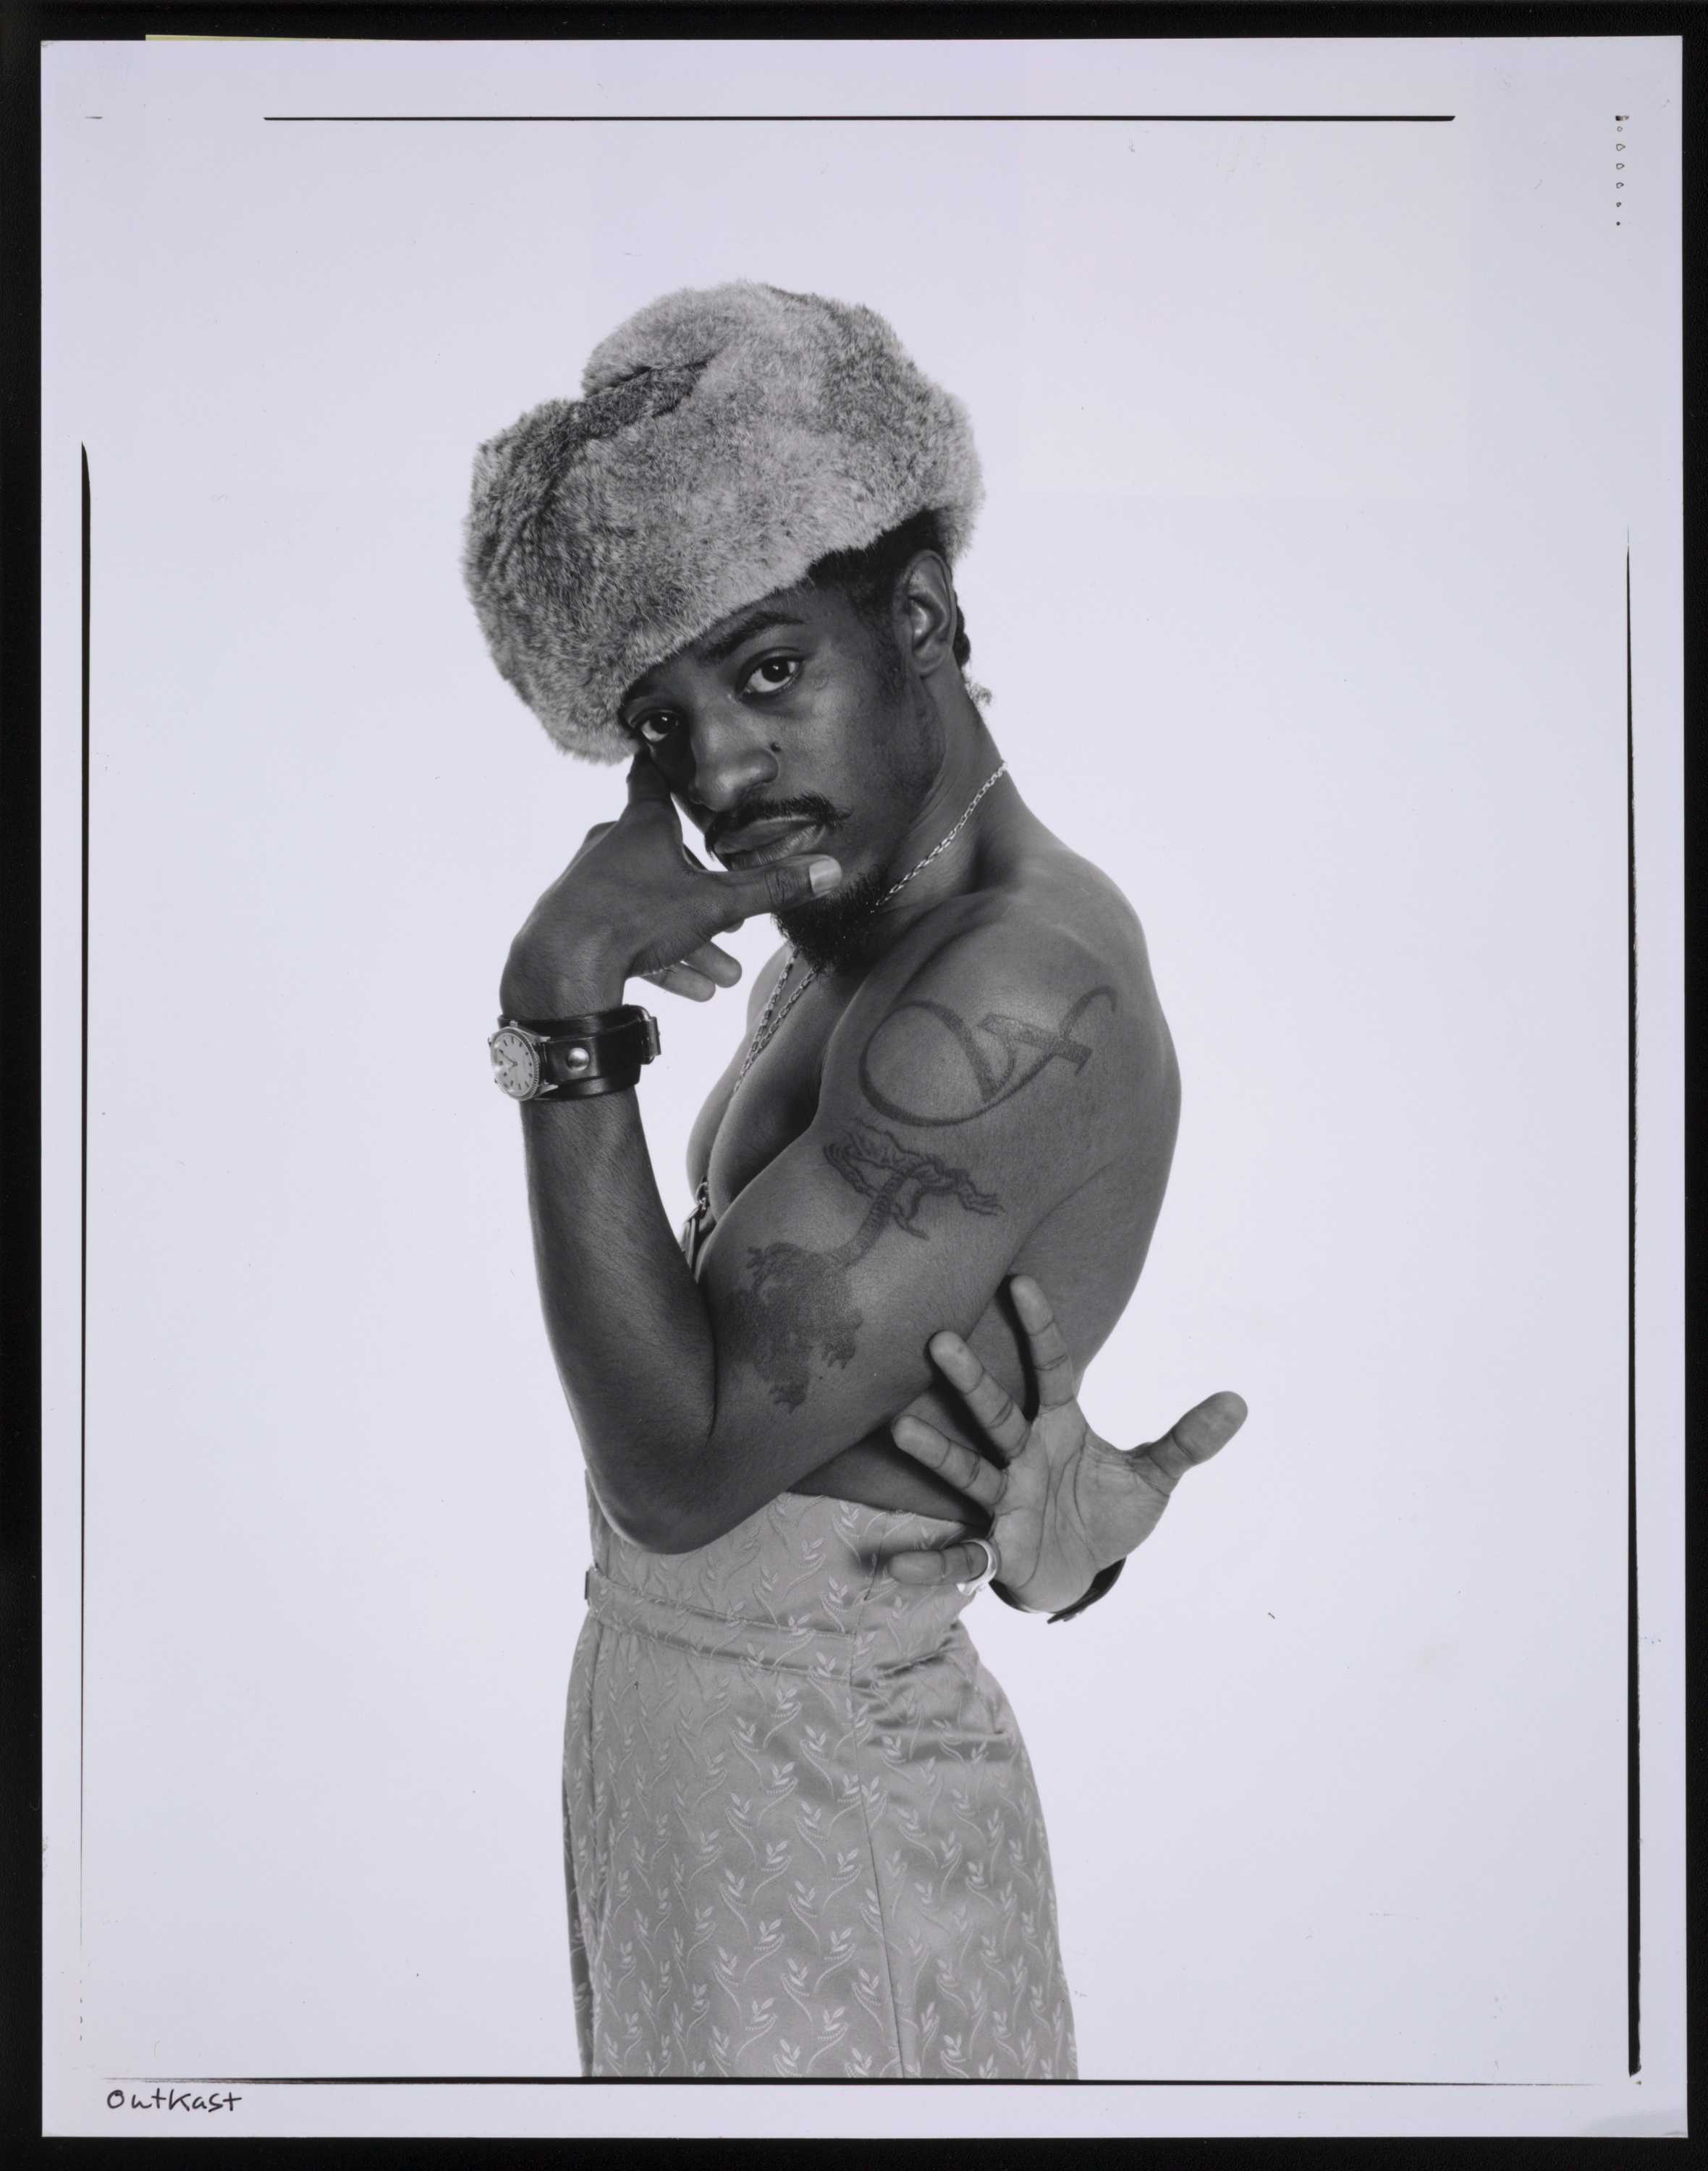 Black and white photograph of Andre 300 posing in a fur hat and looking directly at the camera.